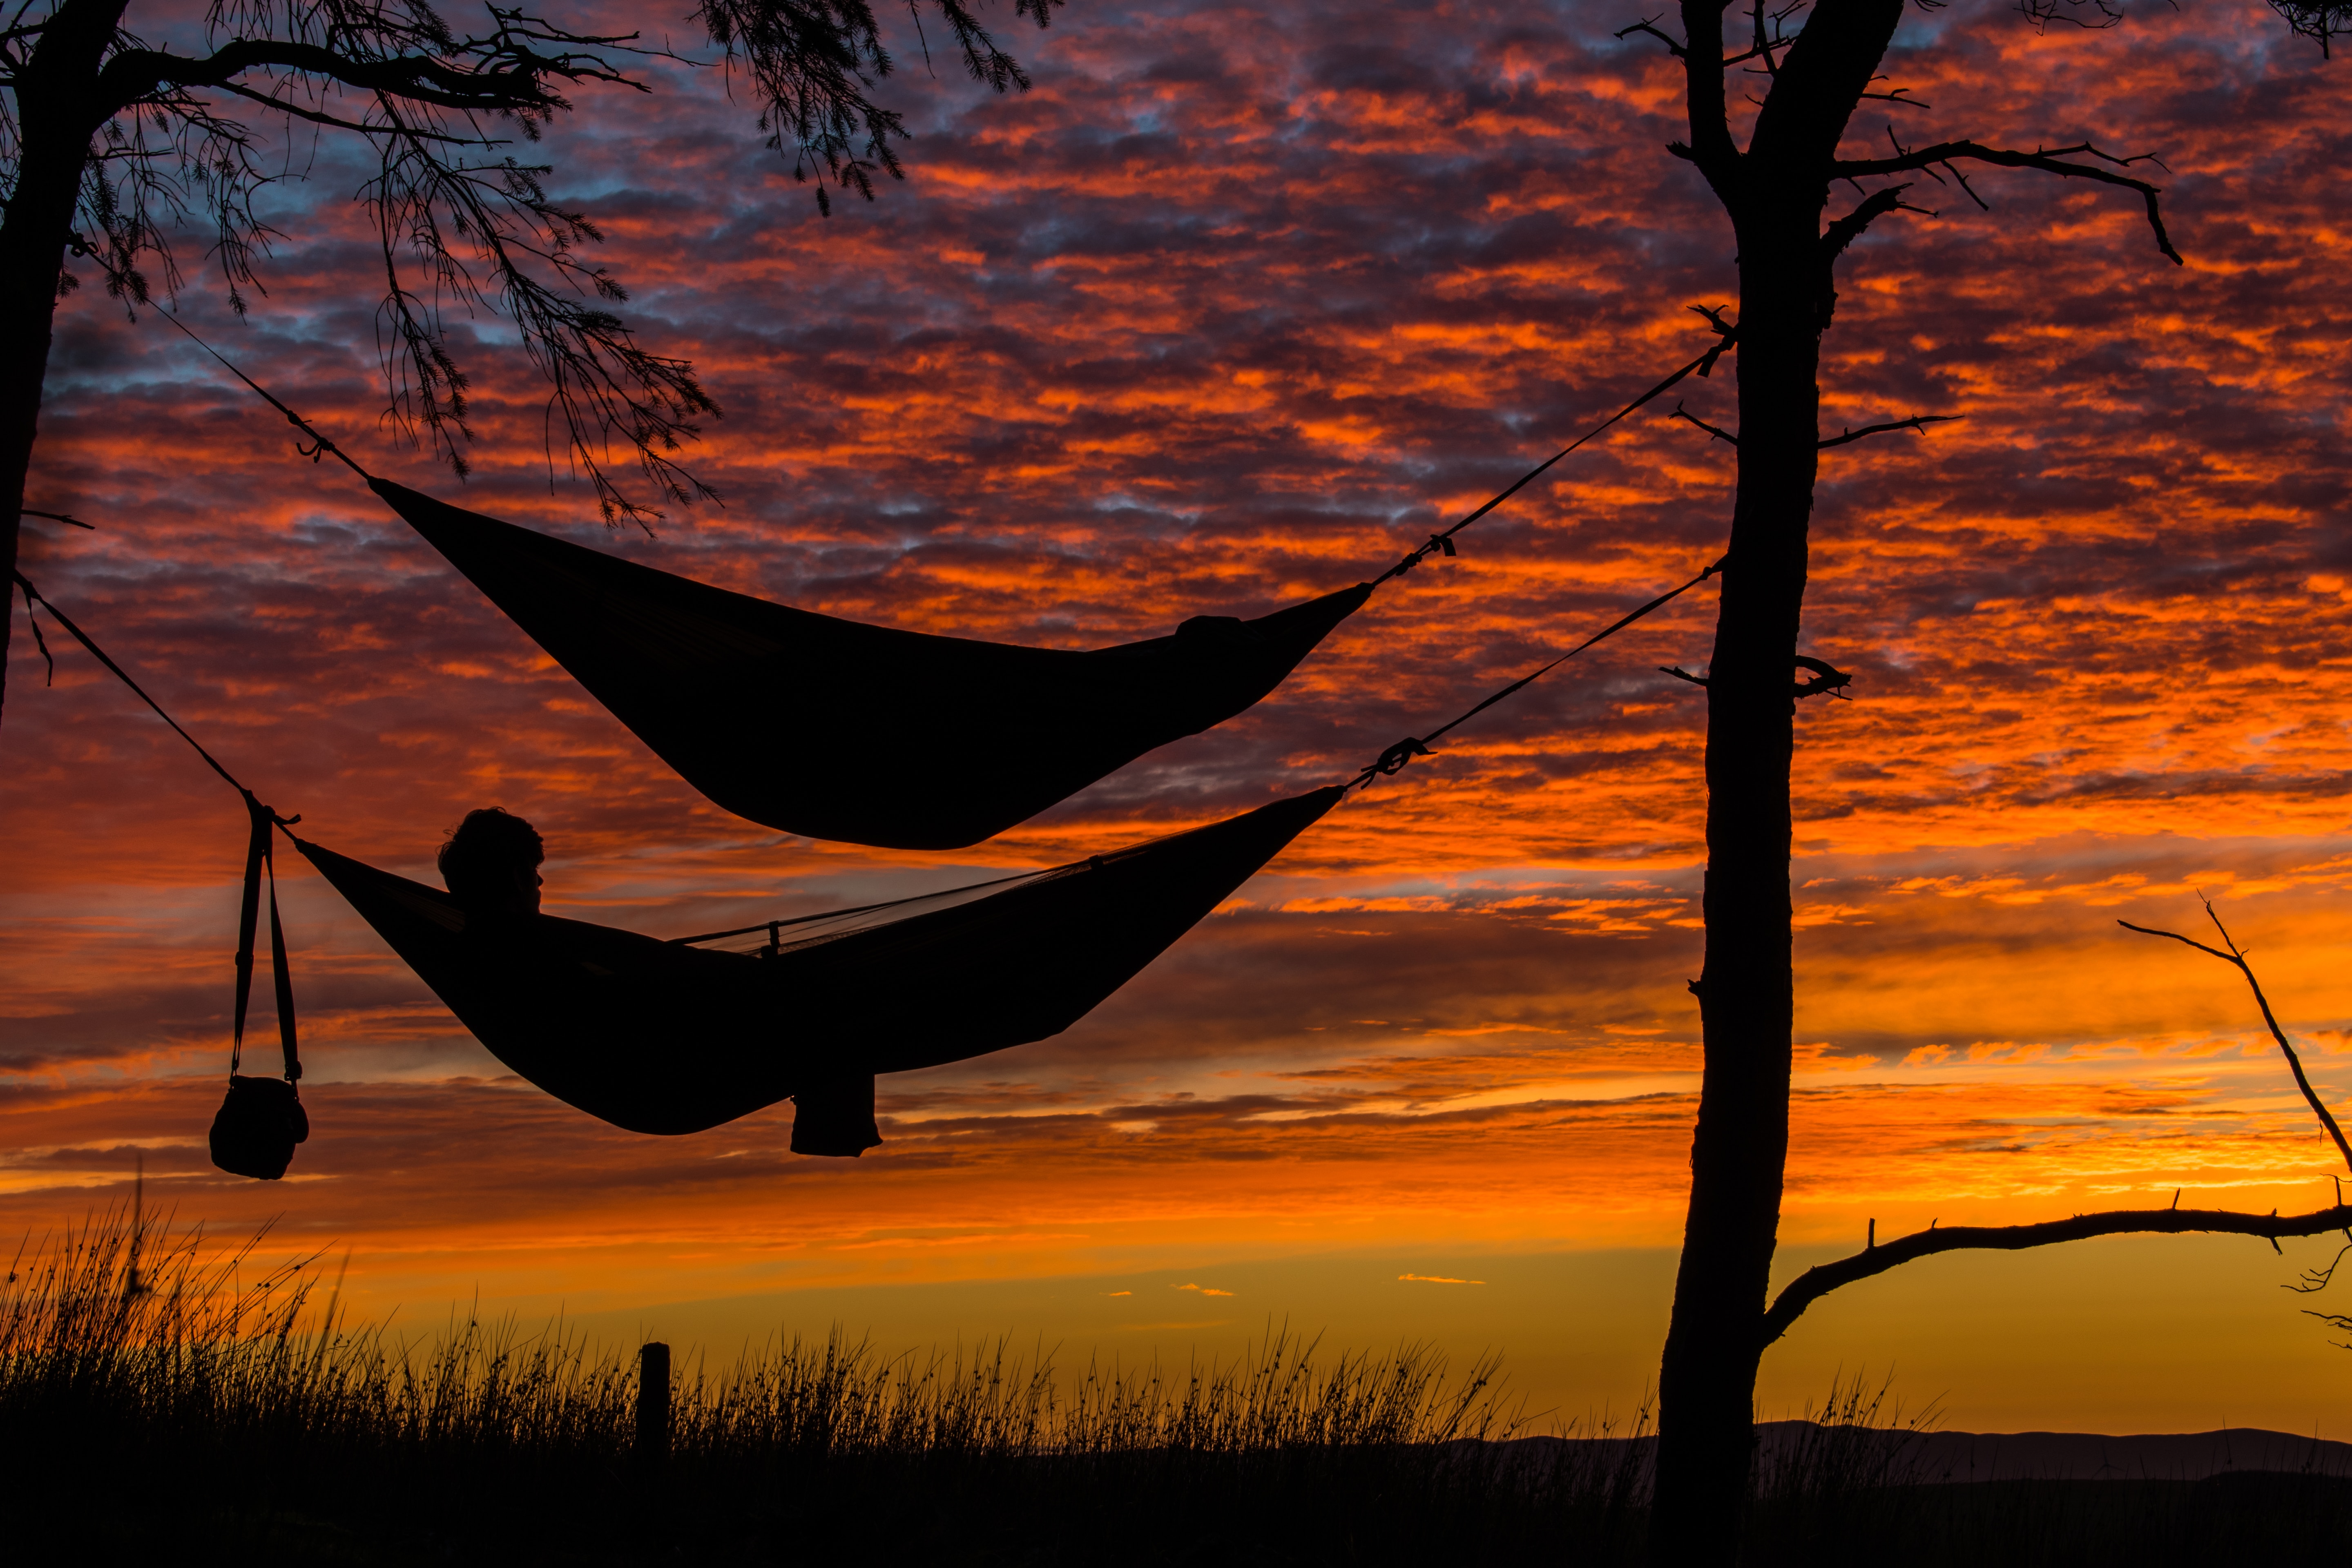 Two hammocks and a red sky: living off the grid